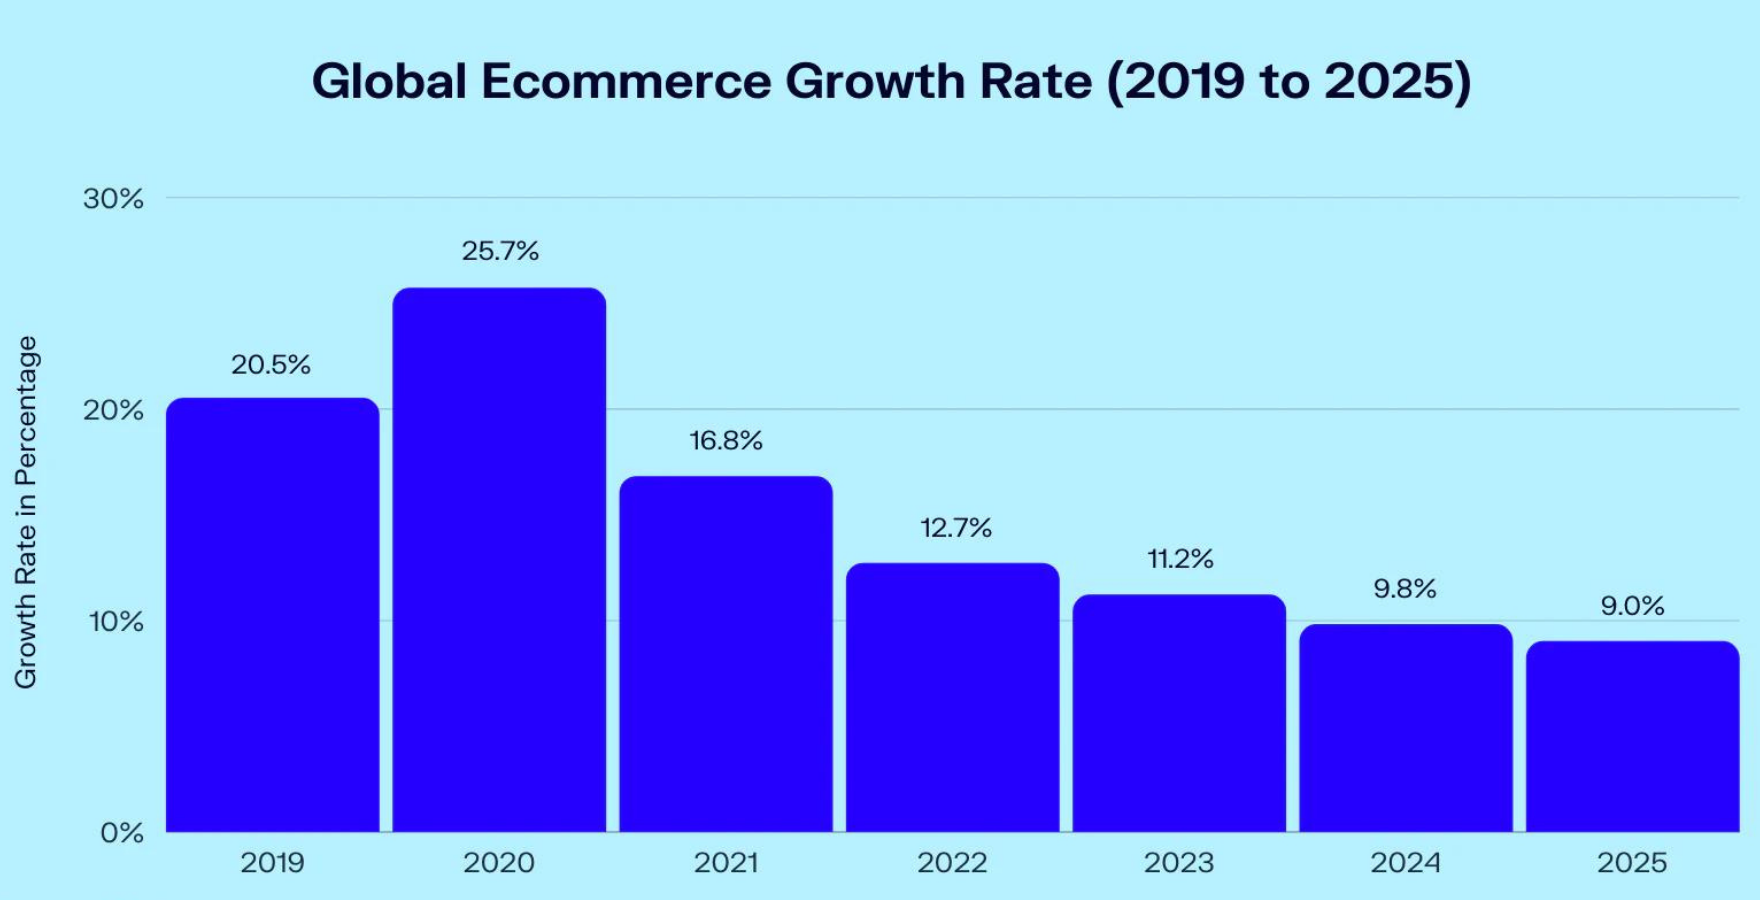 eCommerce sales are estimated to grow